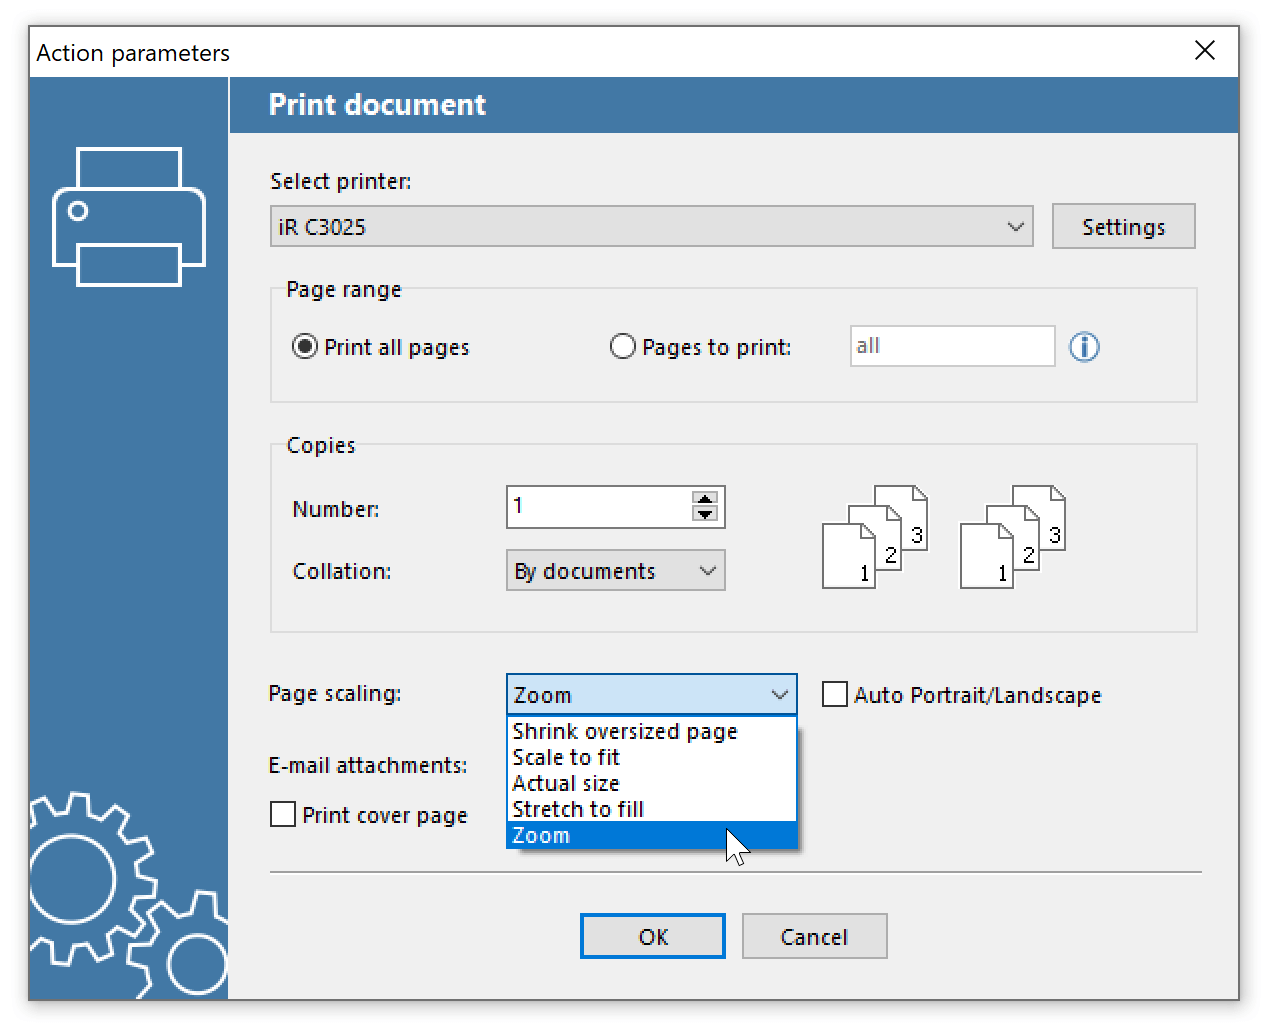 New Zoom scaling mode for Print document Action